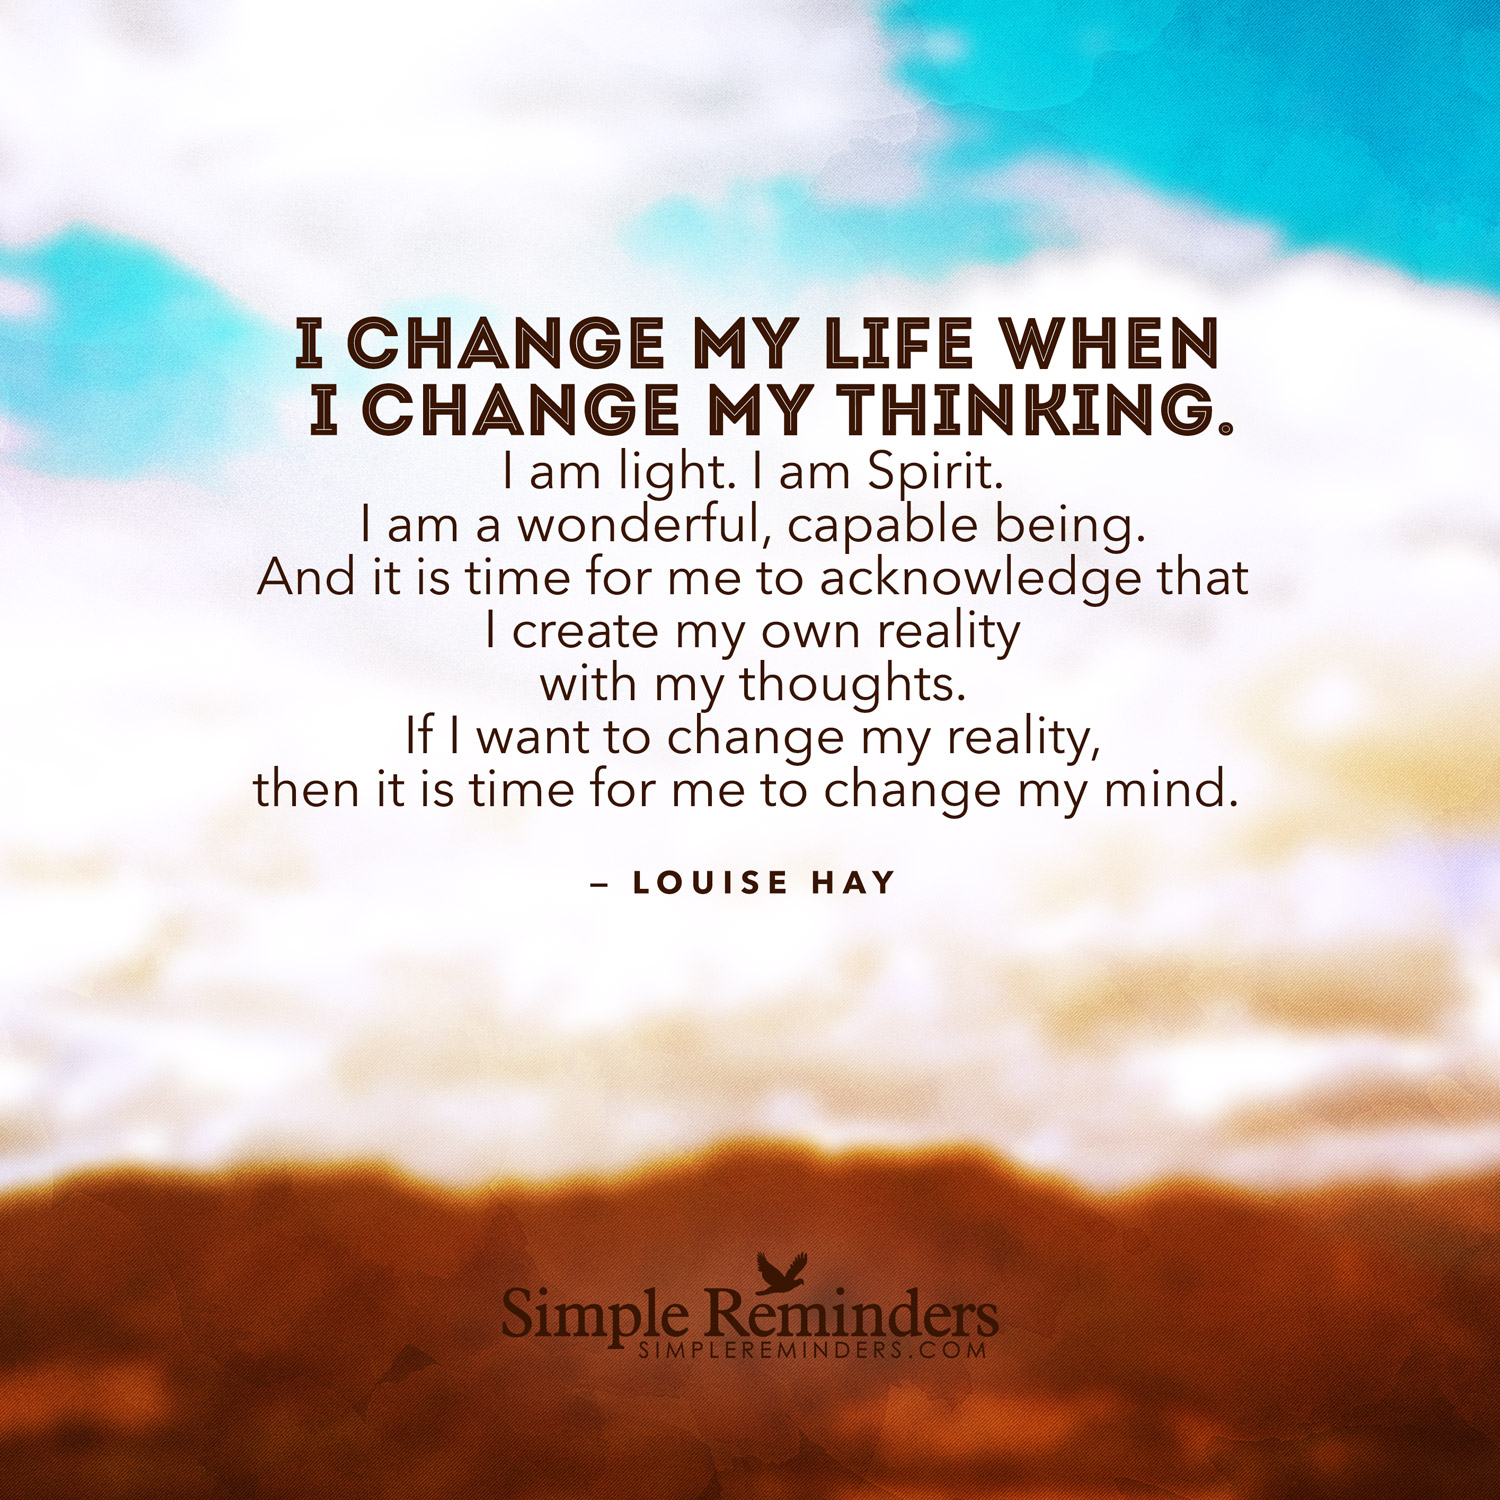 Louise Hay Quotes On Change. QuotesGram